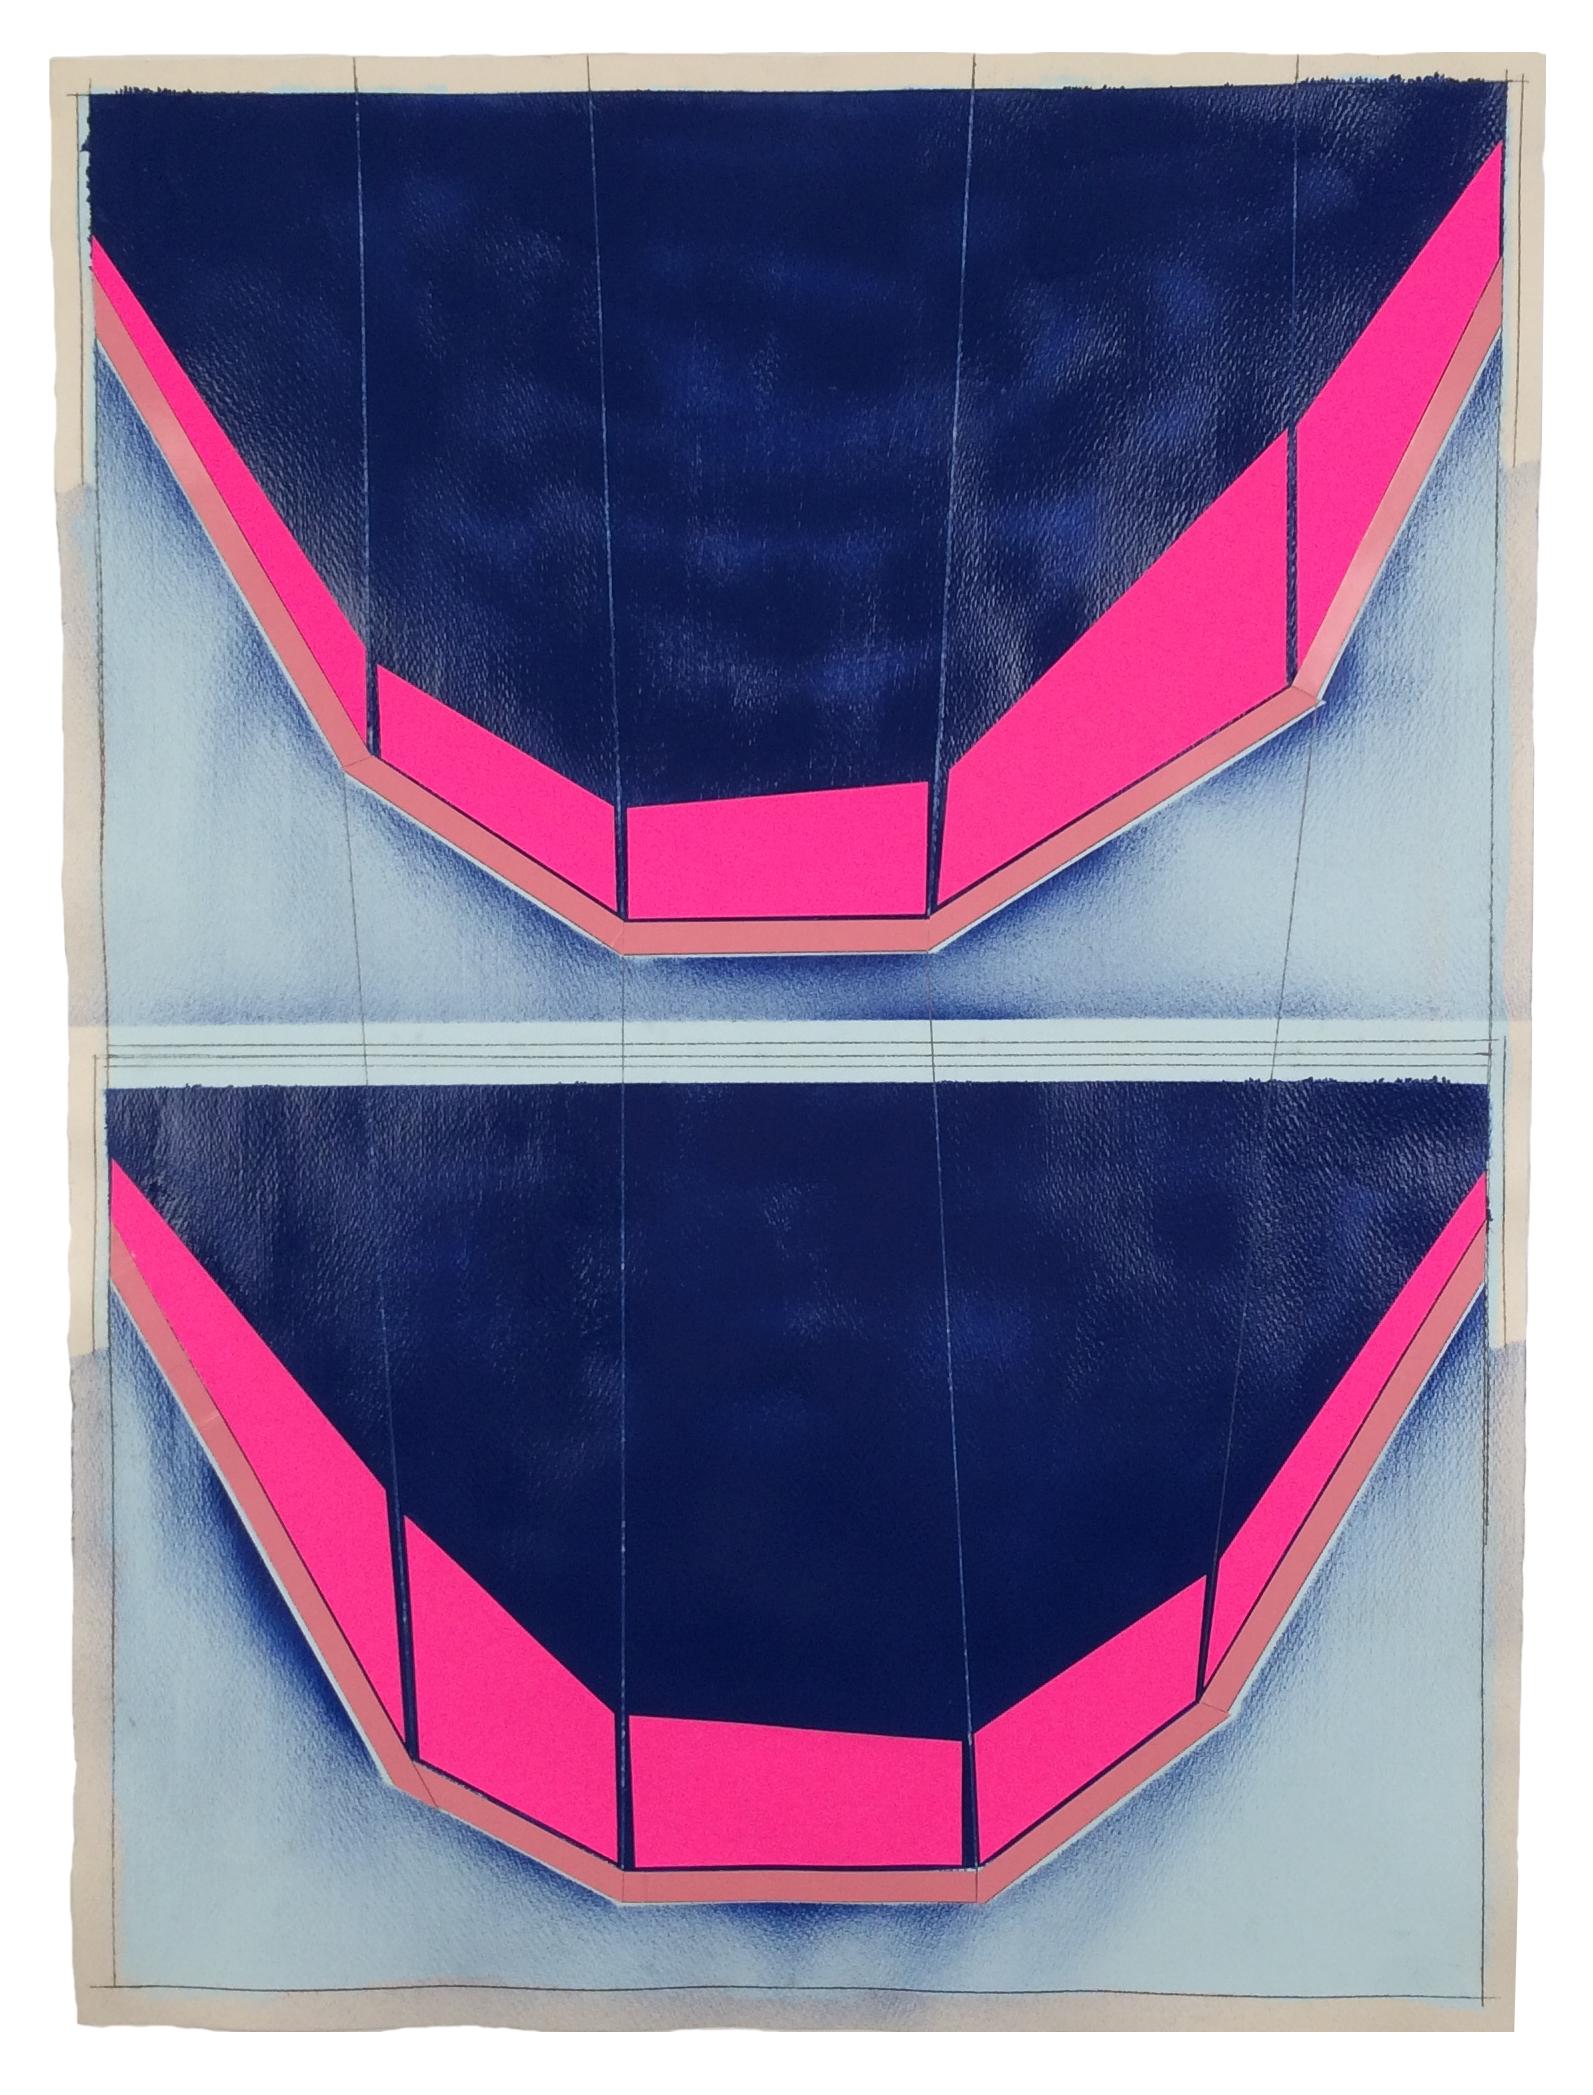  “In Retreat”, pink, black, and blue collaged architectural wall relief  - Mixed Media Art by Ryan Sarah Murphy